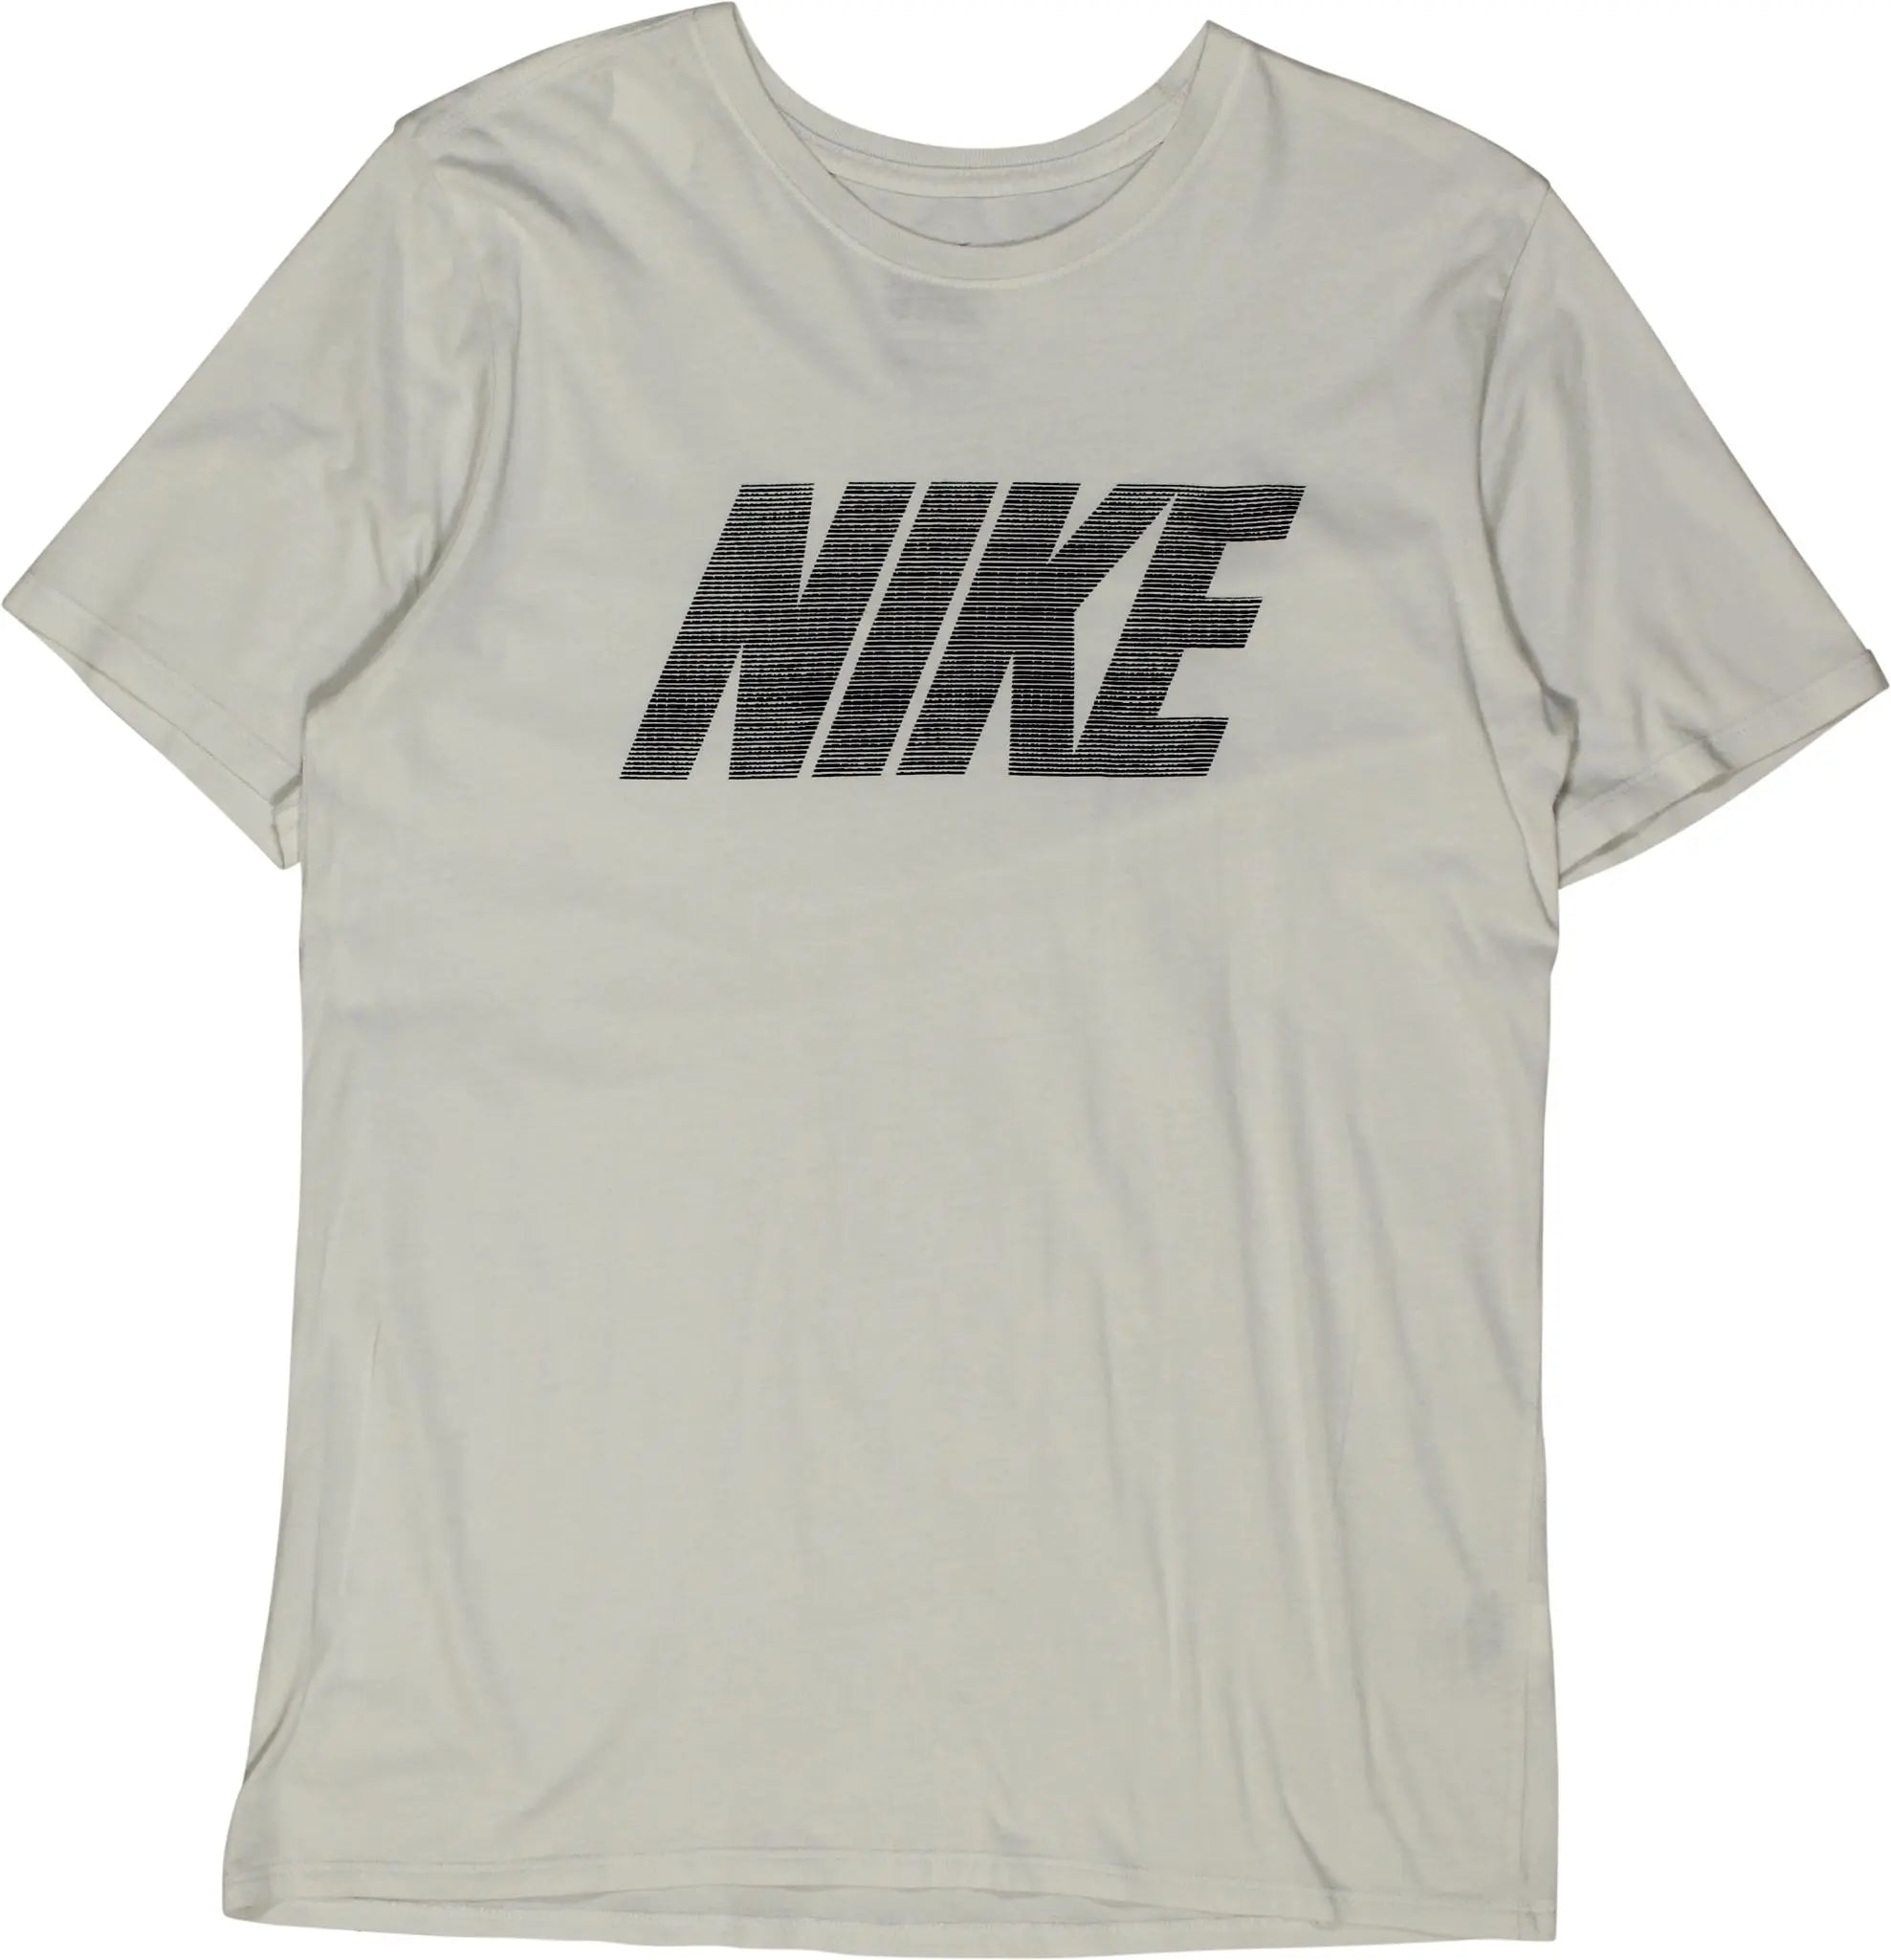 Nike - T-Shirt by Nike- ThriftTale.com - Vintage and second handclothing